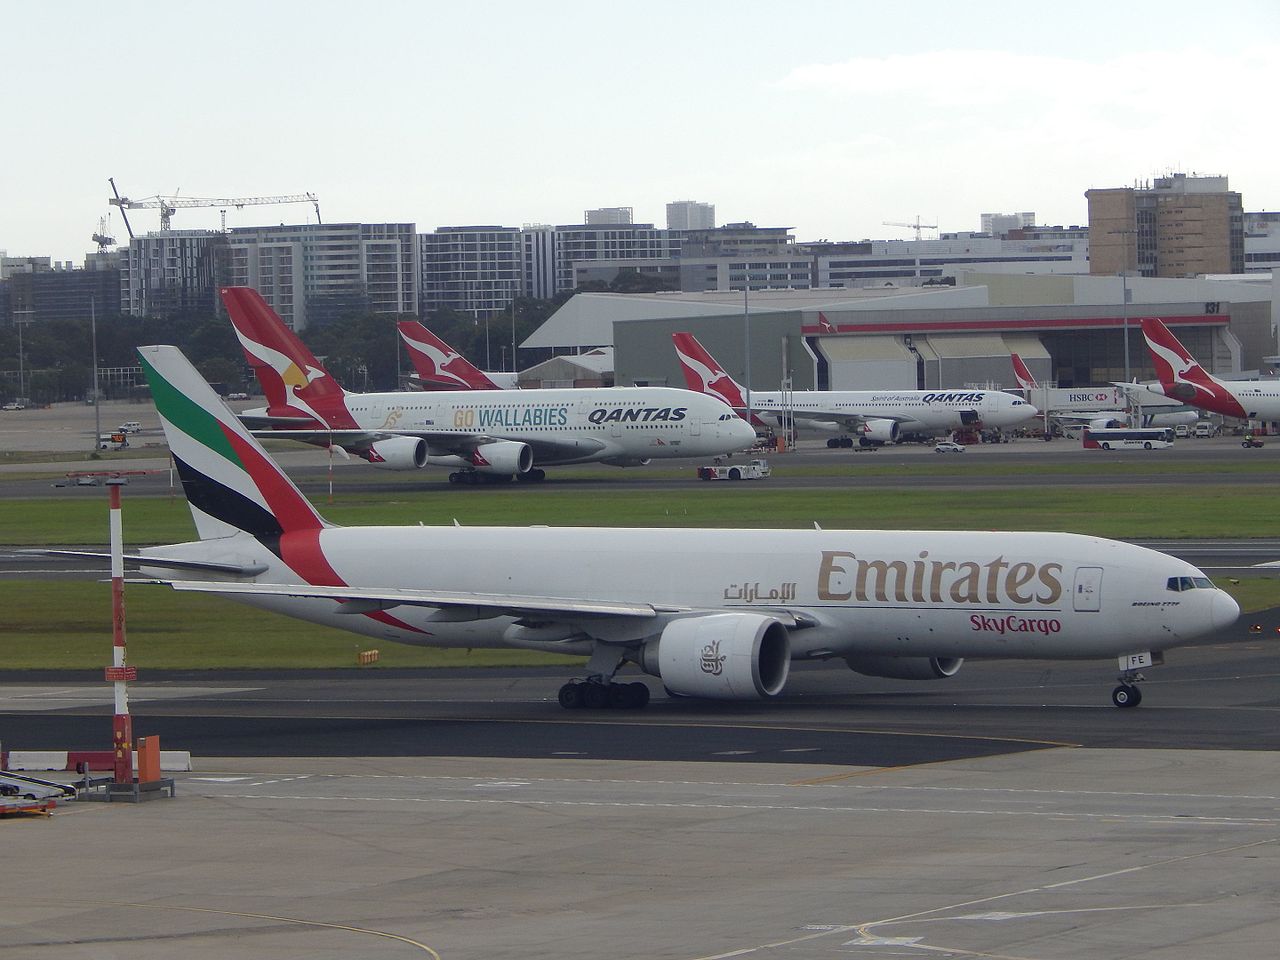 Emirates and Qantas aircraft parked together.